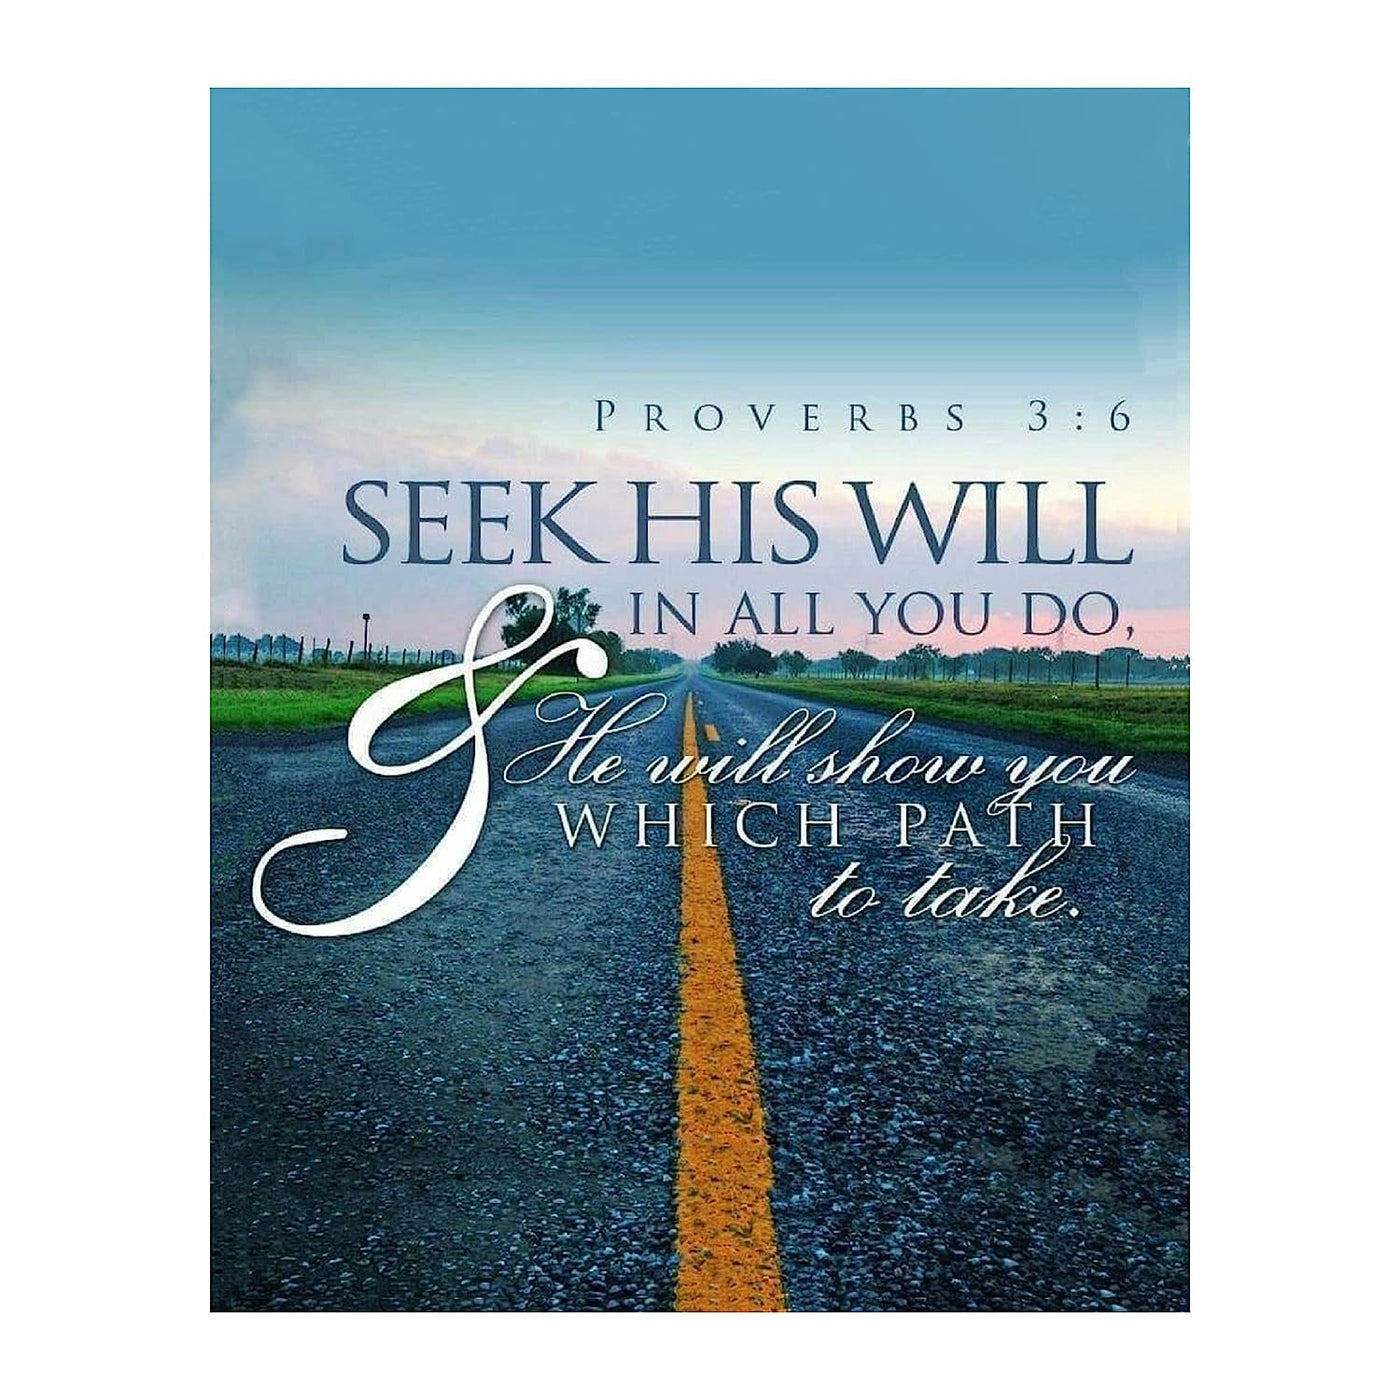 Seek His Will, He Will Show You Path Proverbs 3:6- Bible Verse Wall Art-8x10"- Modern Typographic Design Print. Scripture Poster Print-Ready to Frame. Home-Office-Church D?cor. Great Christian Gift.